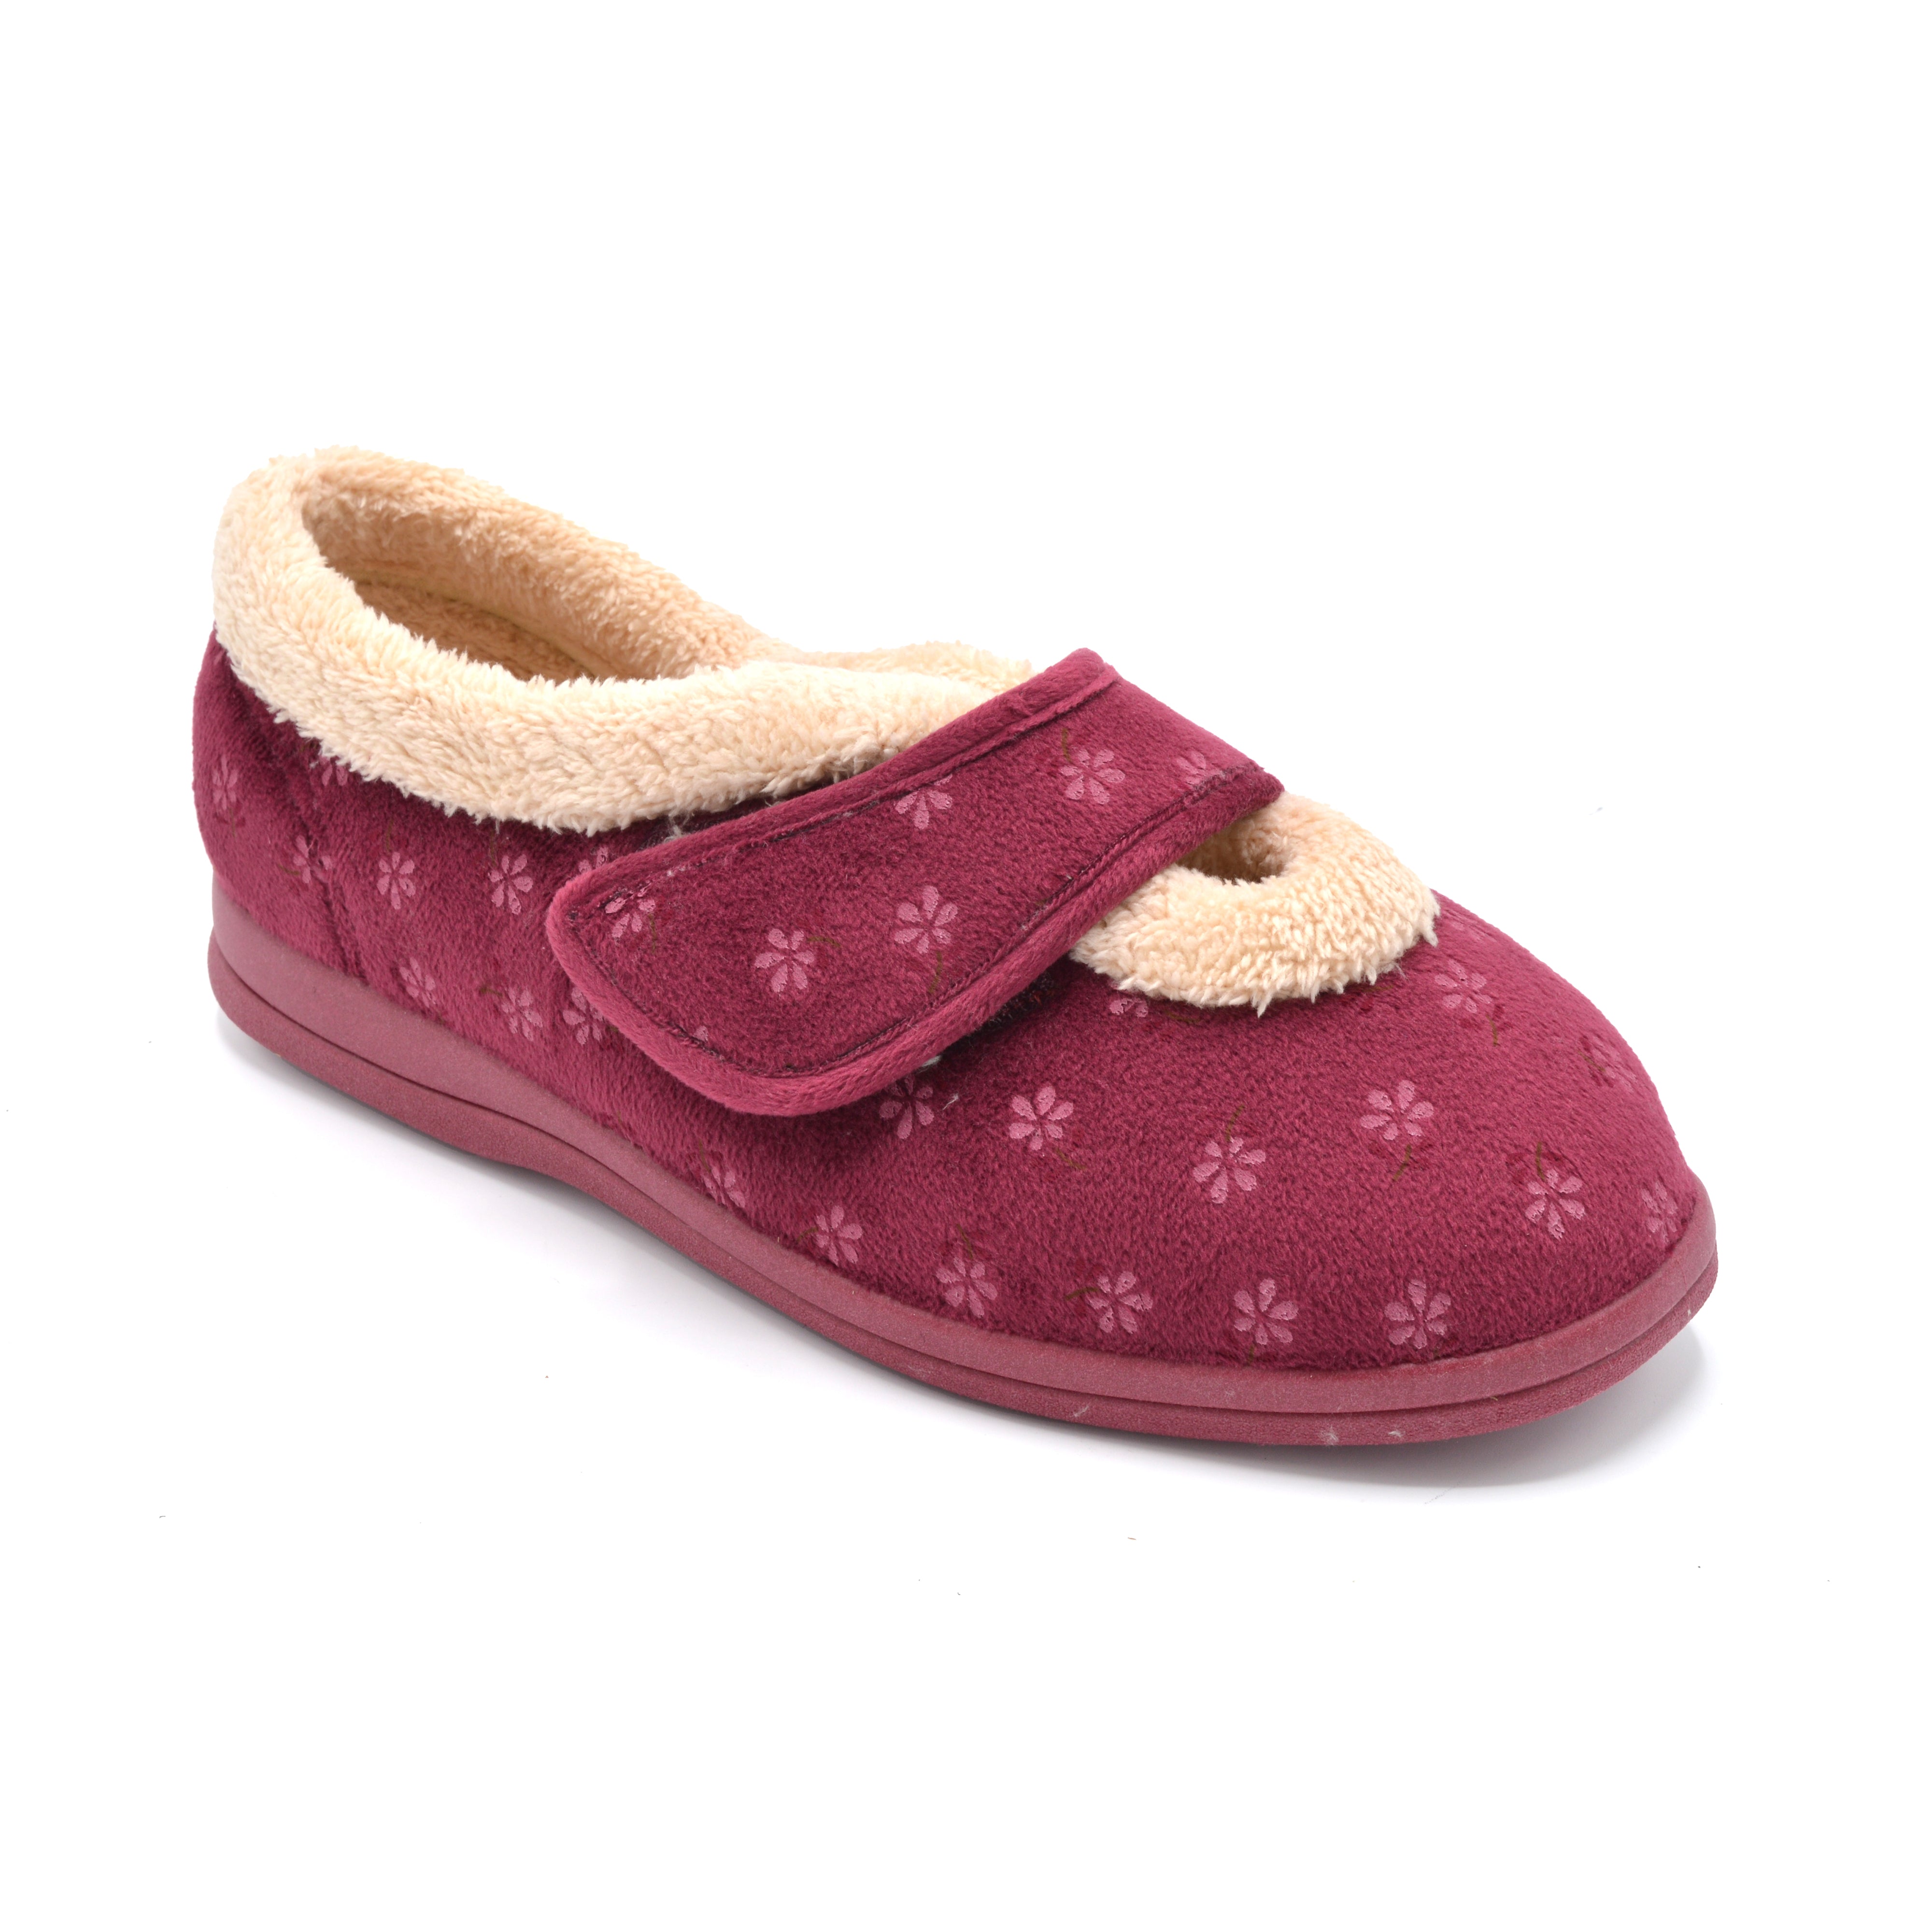 Extra Wide Velcro Slipper For Bunions